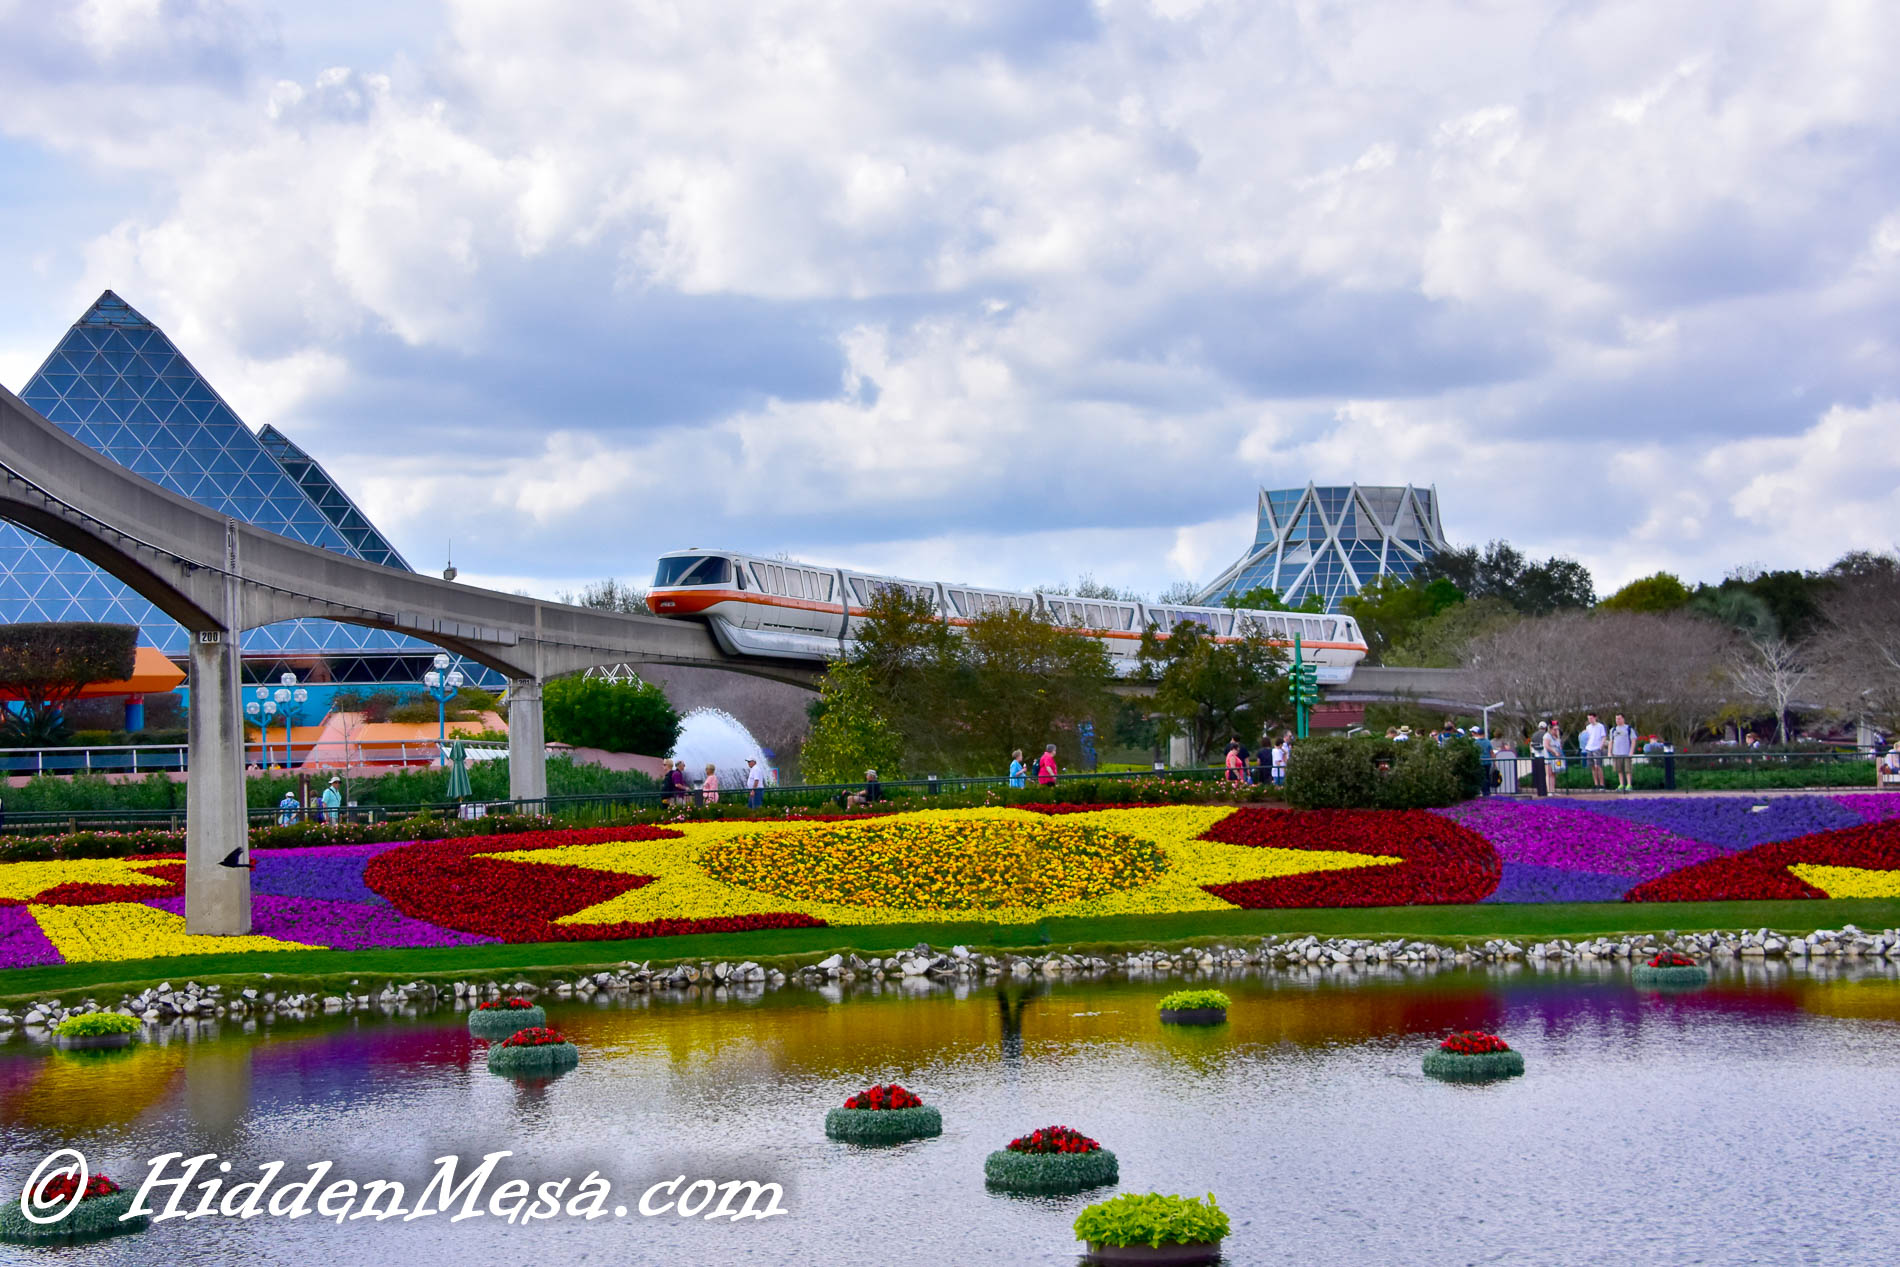 The Epcot Flower and Garden Festival